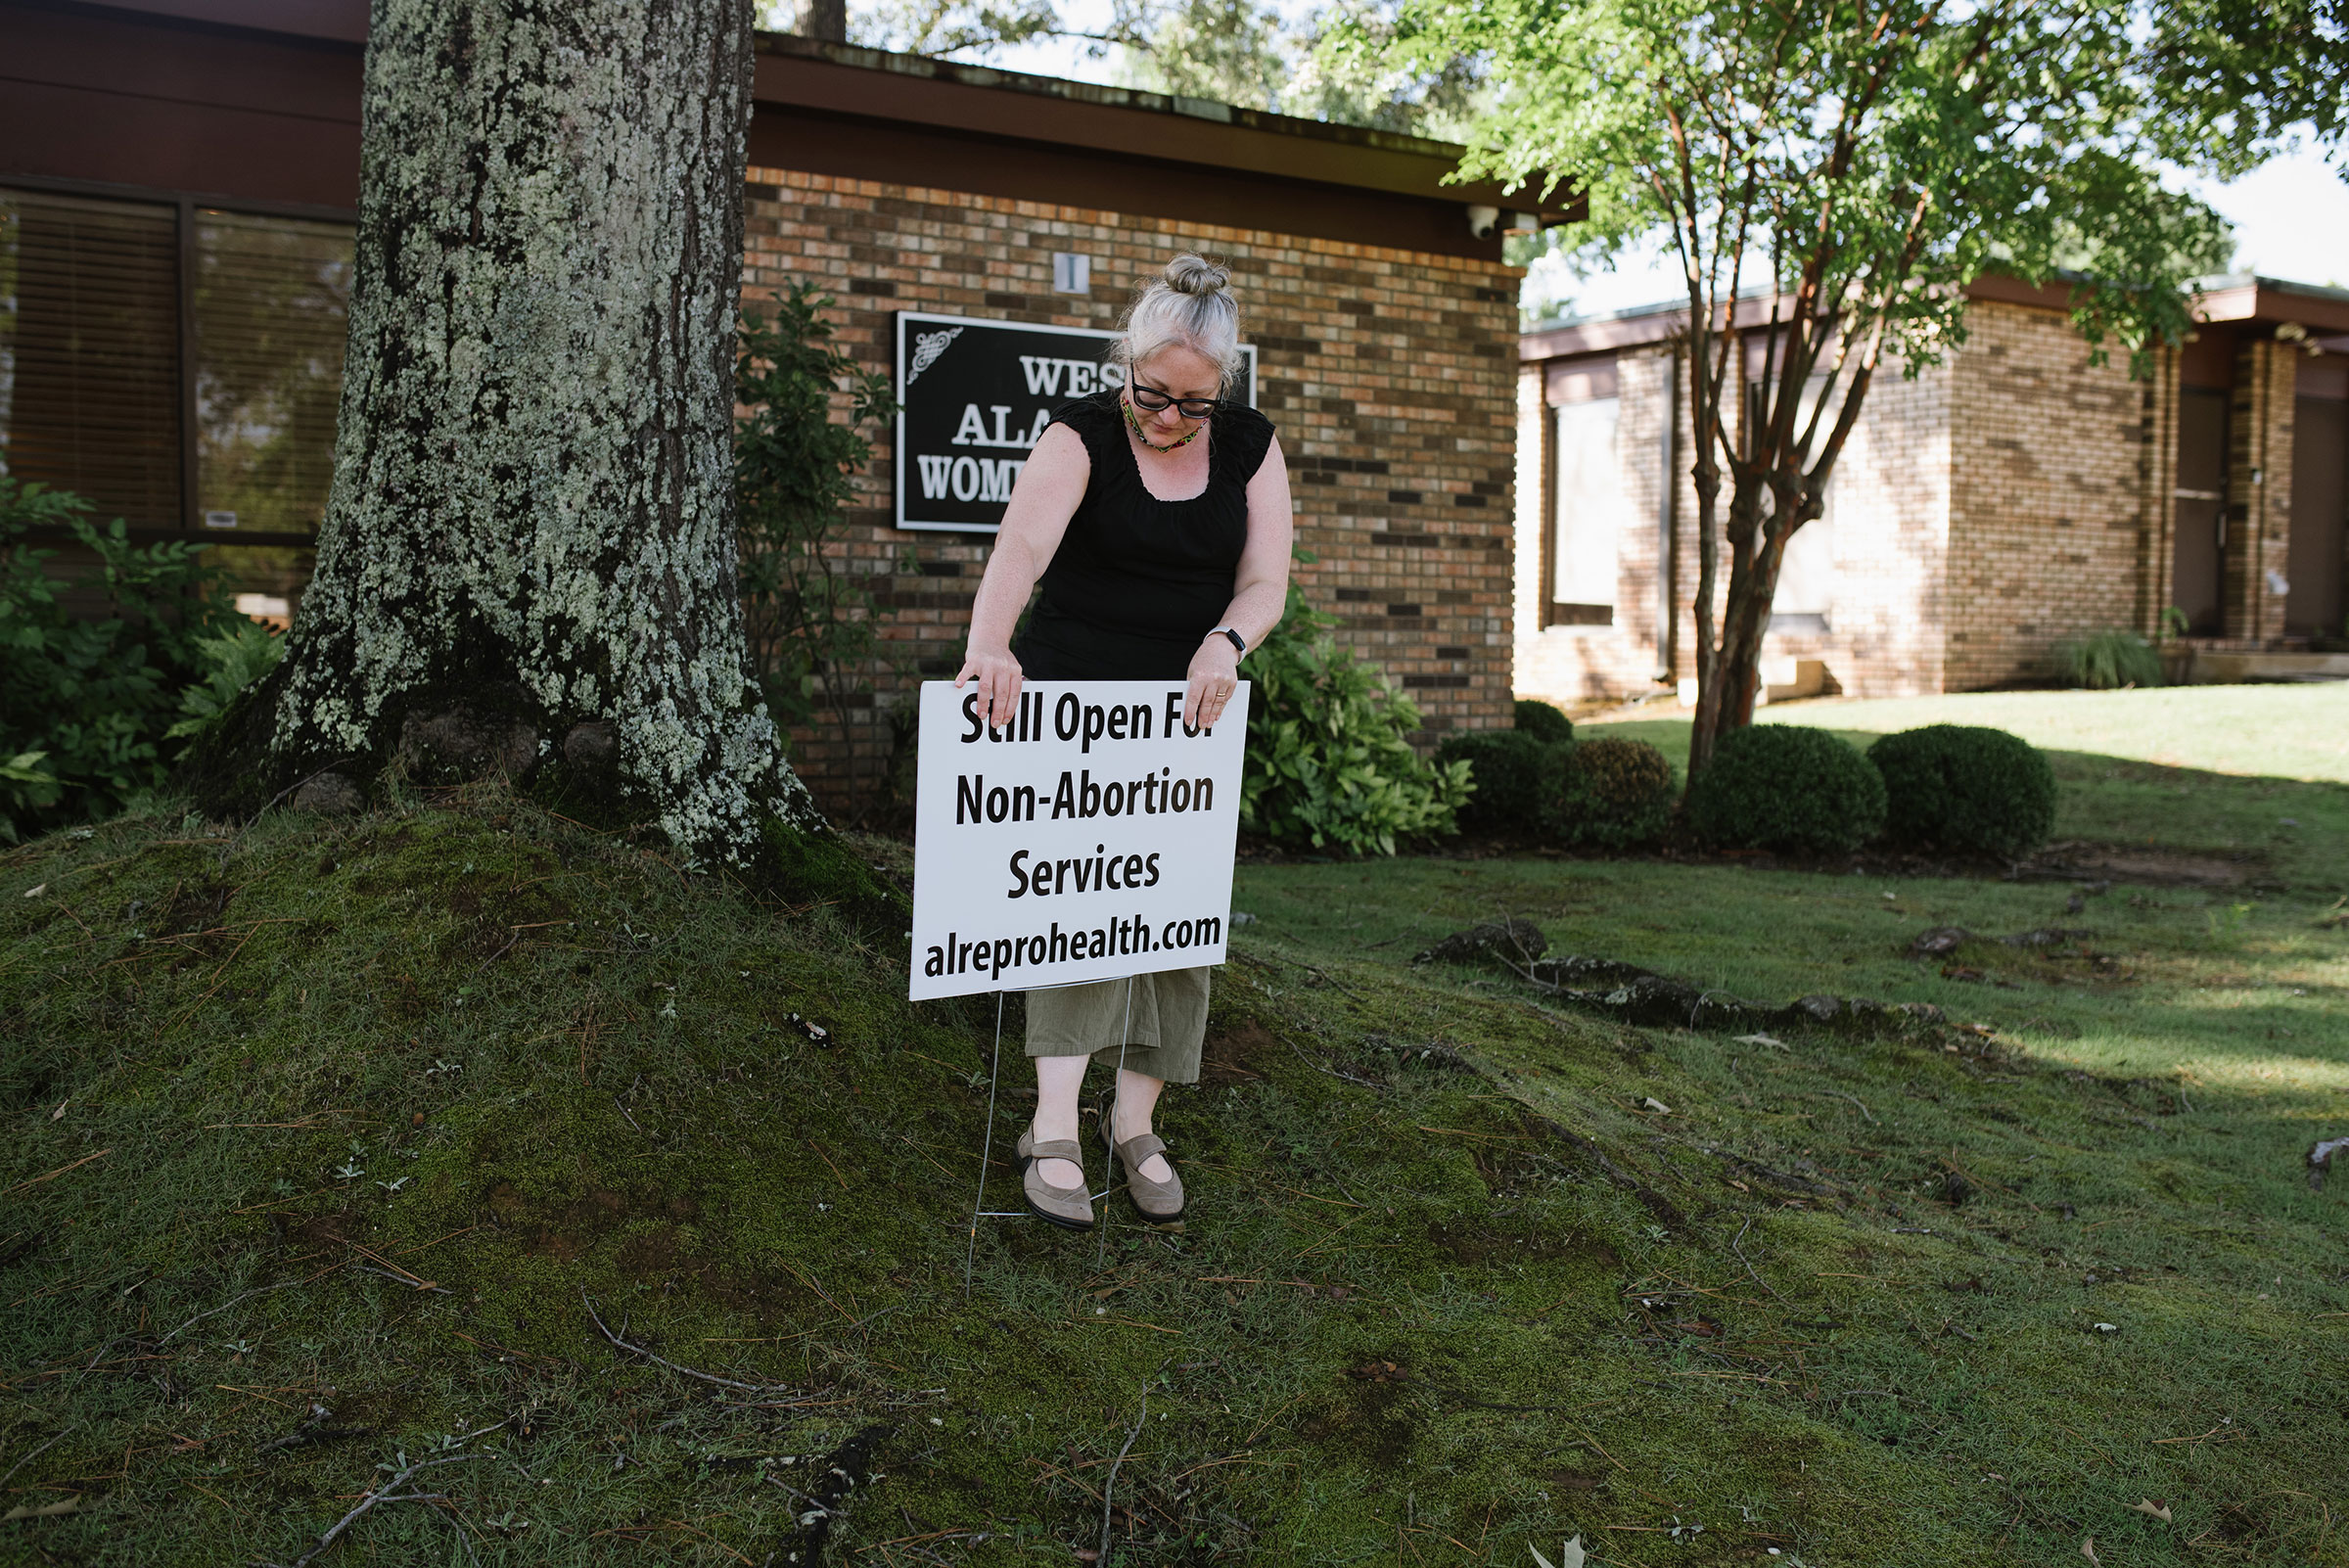 Director of operations Robin Marty outside the West Alabama Women’s Center on July 11, 2022, the day the clinic reopened as a new nonprofit entity. (Lucy Garrett for TIME)